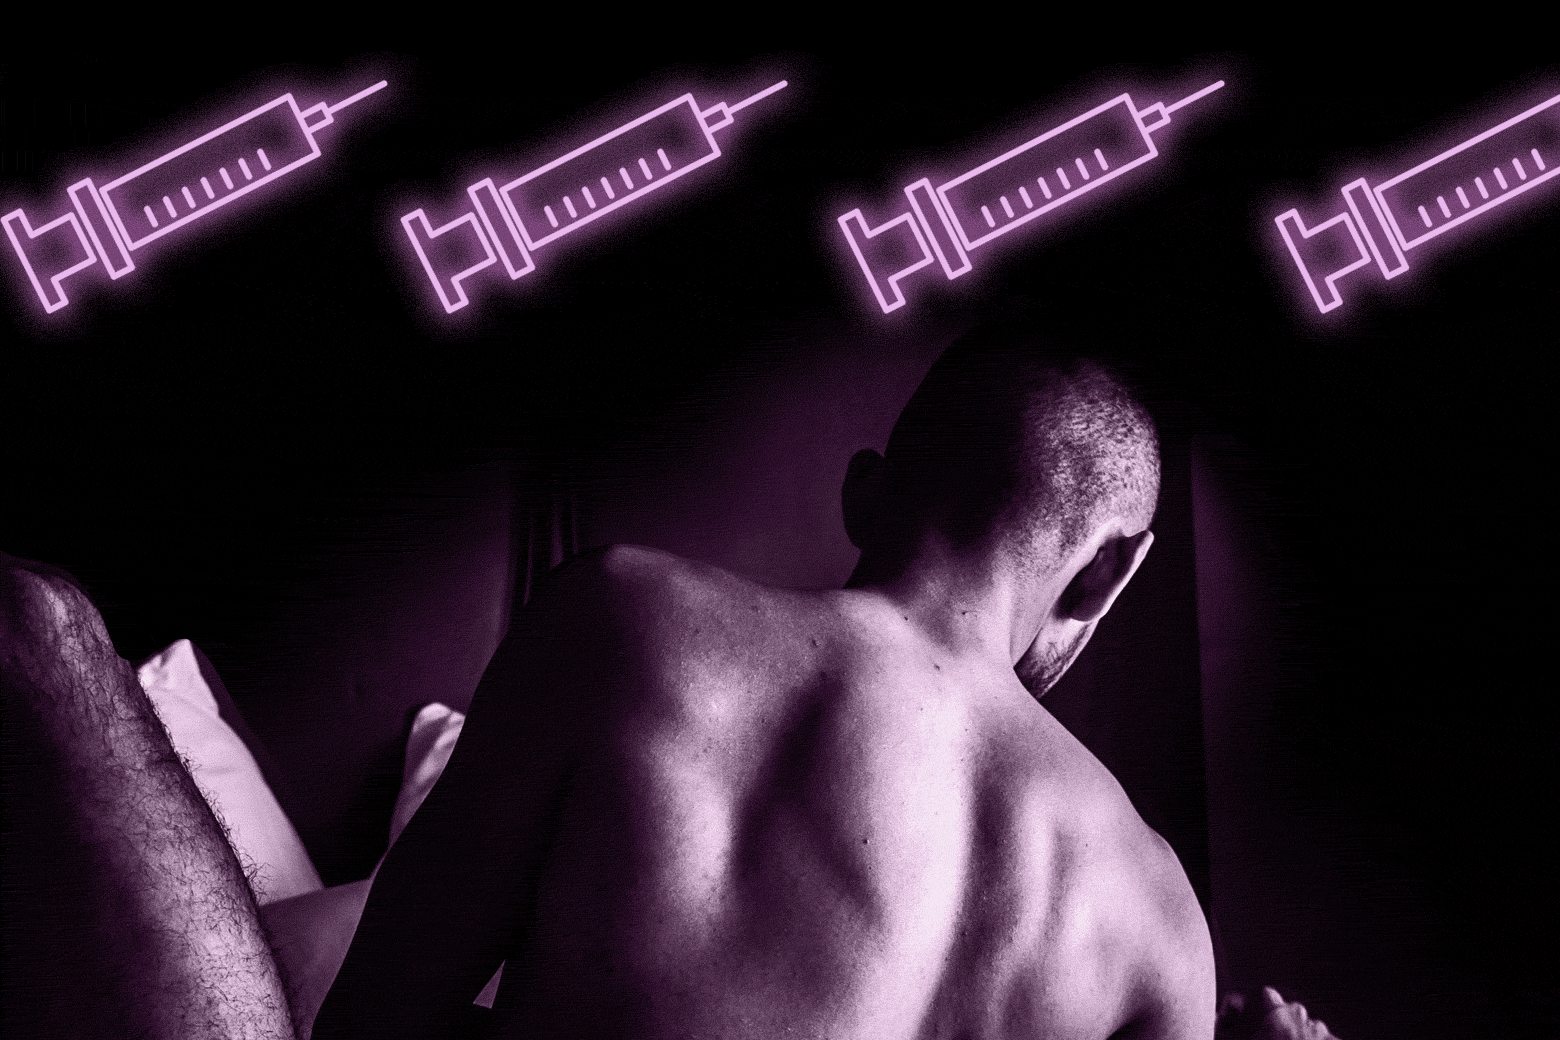 Man on bed with neon vaccine needles above him.